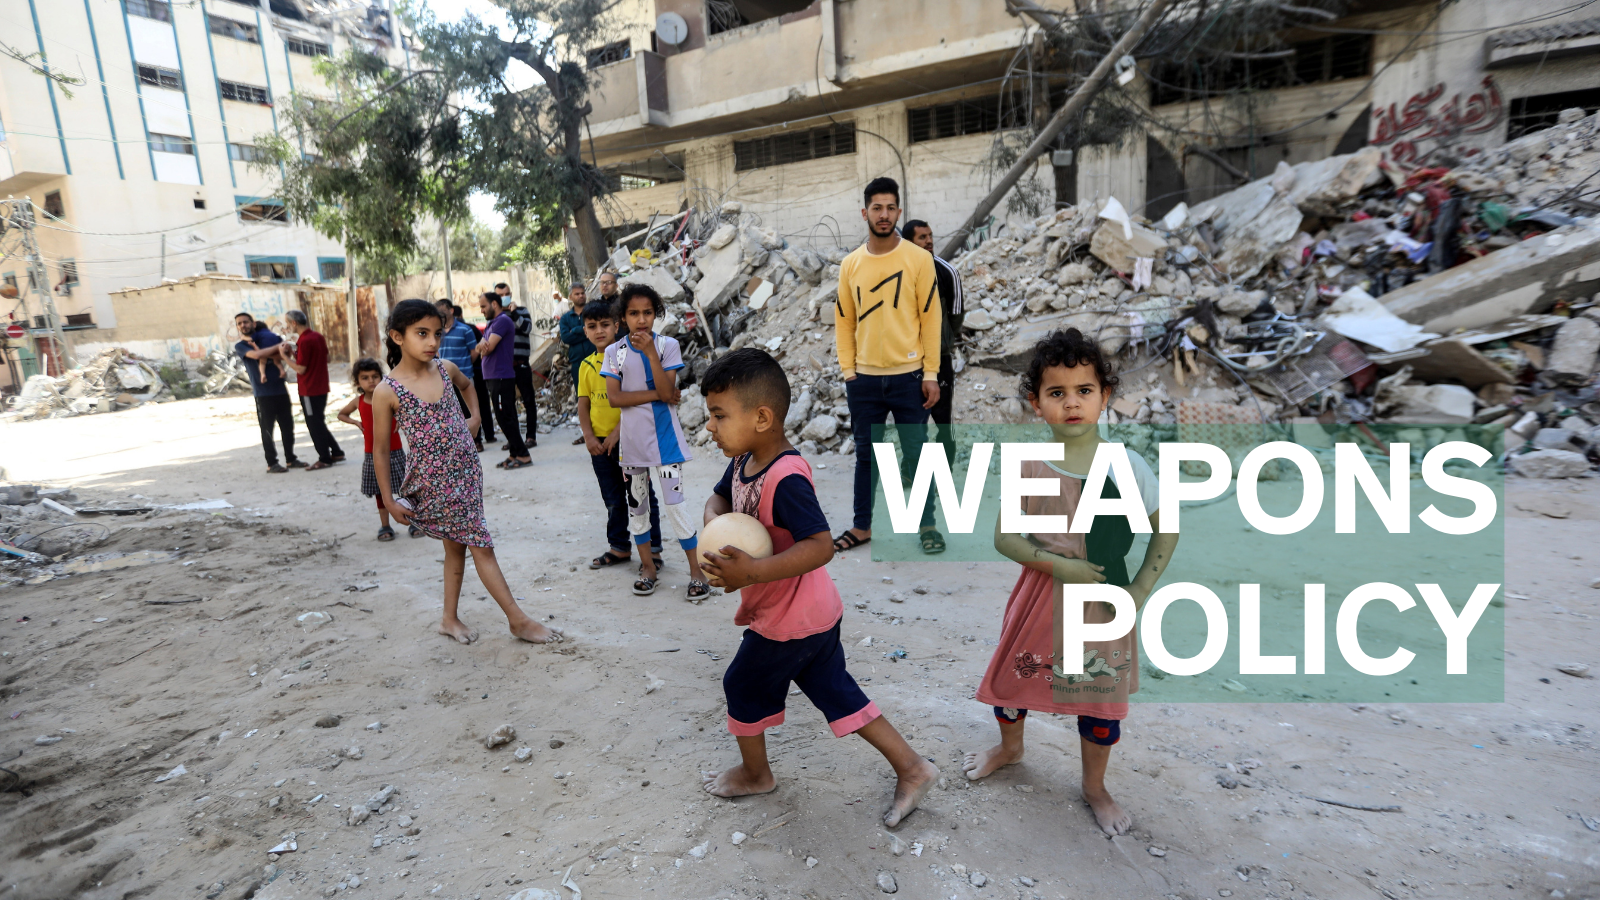 Children playing in the streets of Gaza following the Israeli bombings in May 2021.